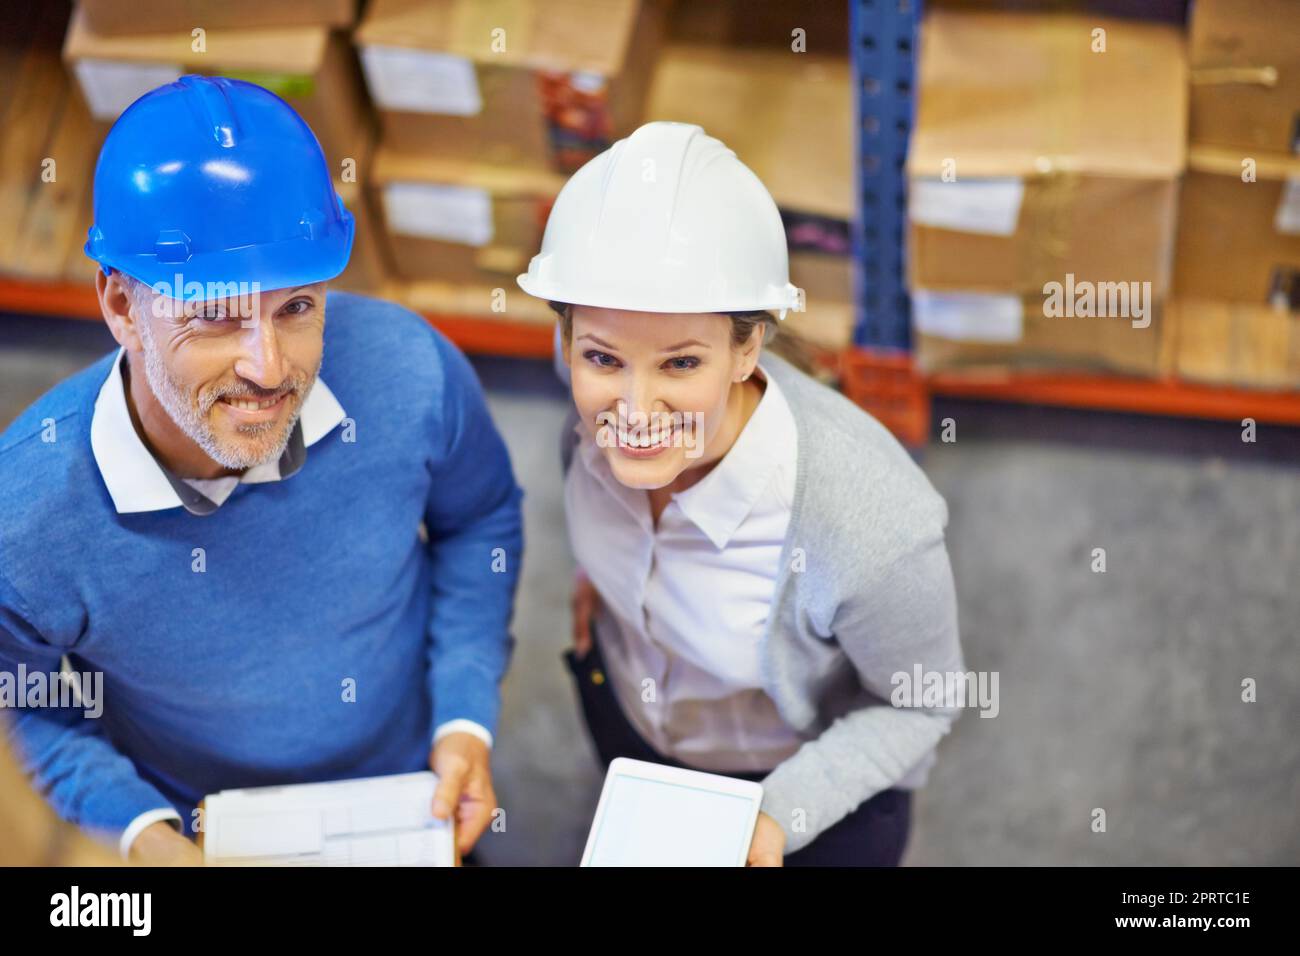 We have what it takes. Overhead shot of two people wearing hardhats smiling at the camera in a warehouse. Stock Photo